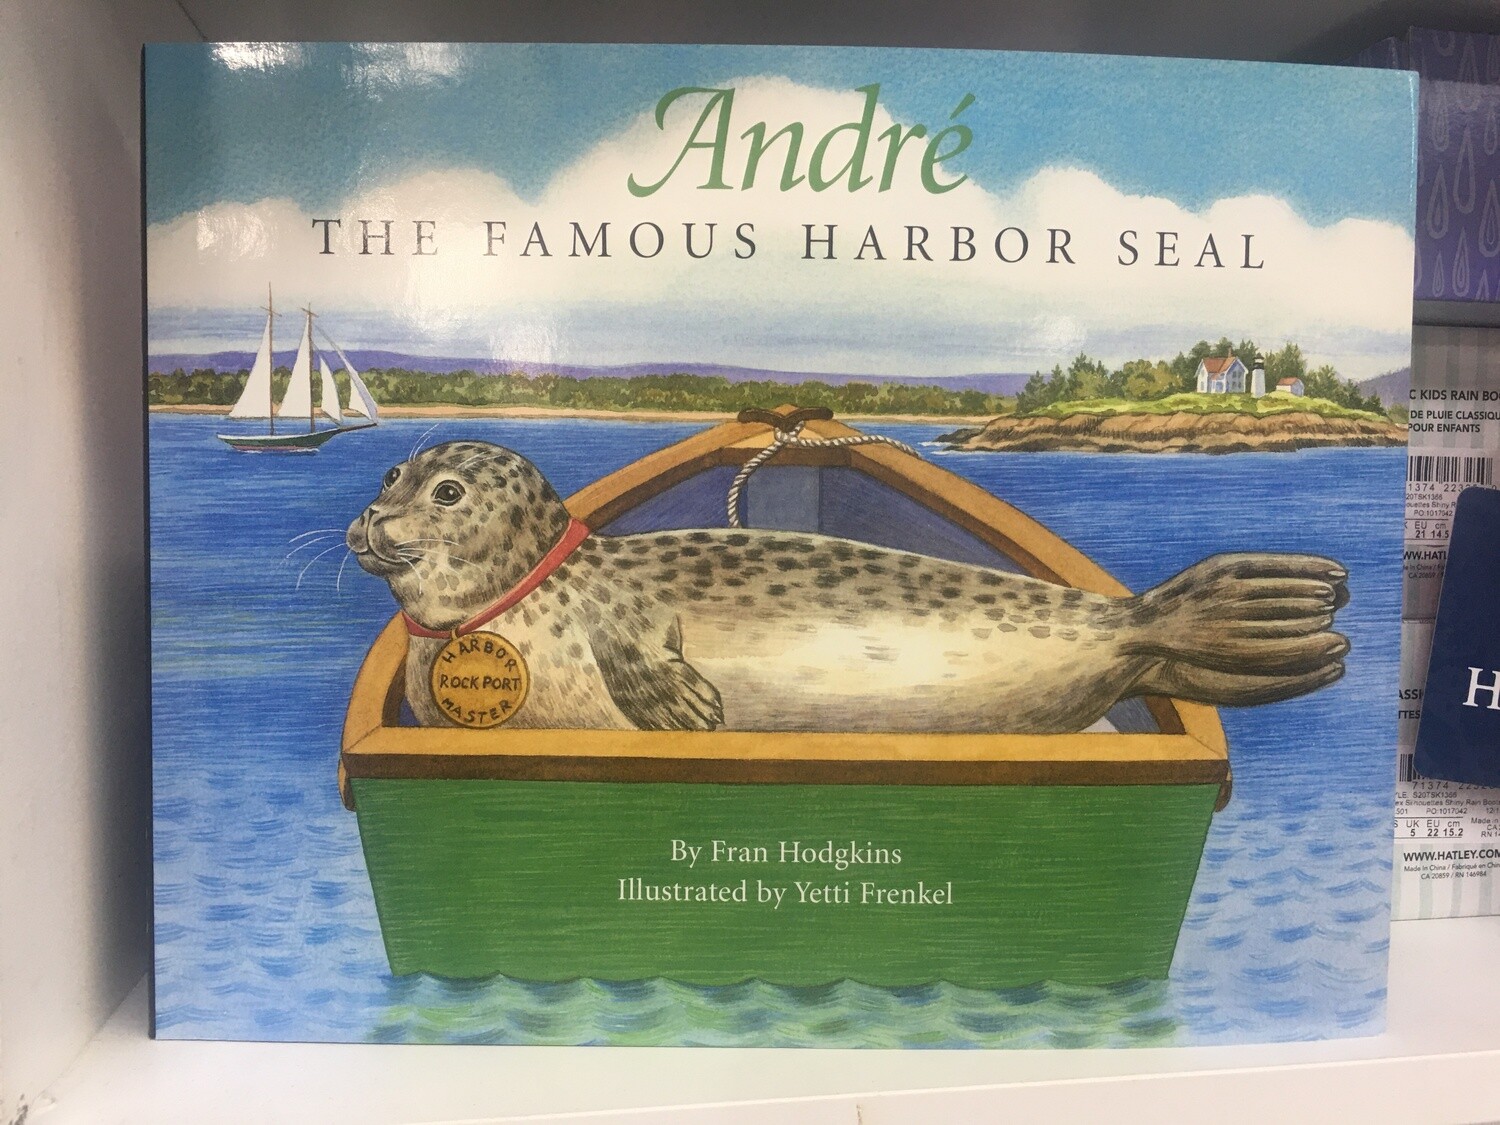 André, The Famous Harbor Seal